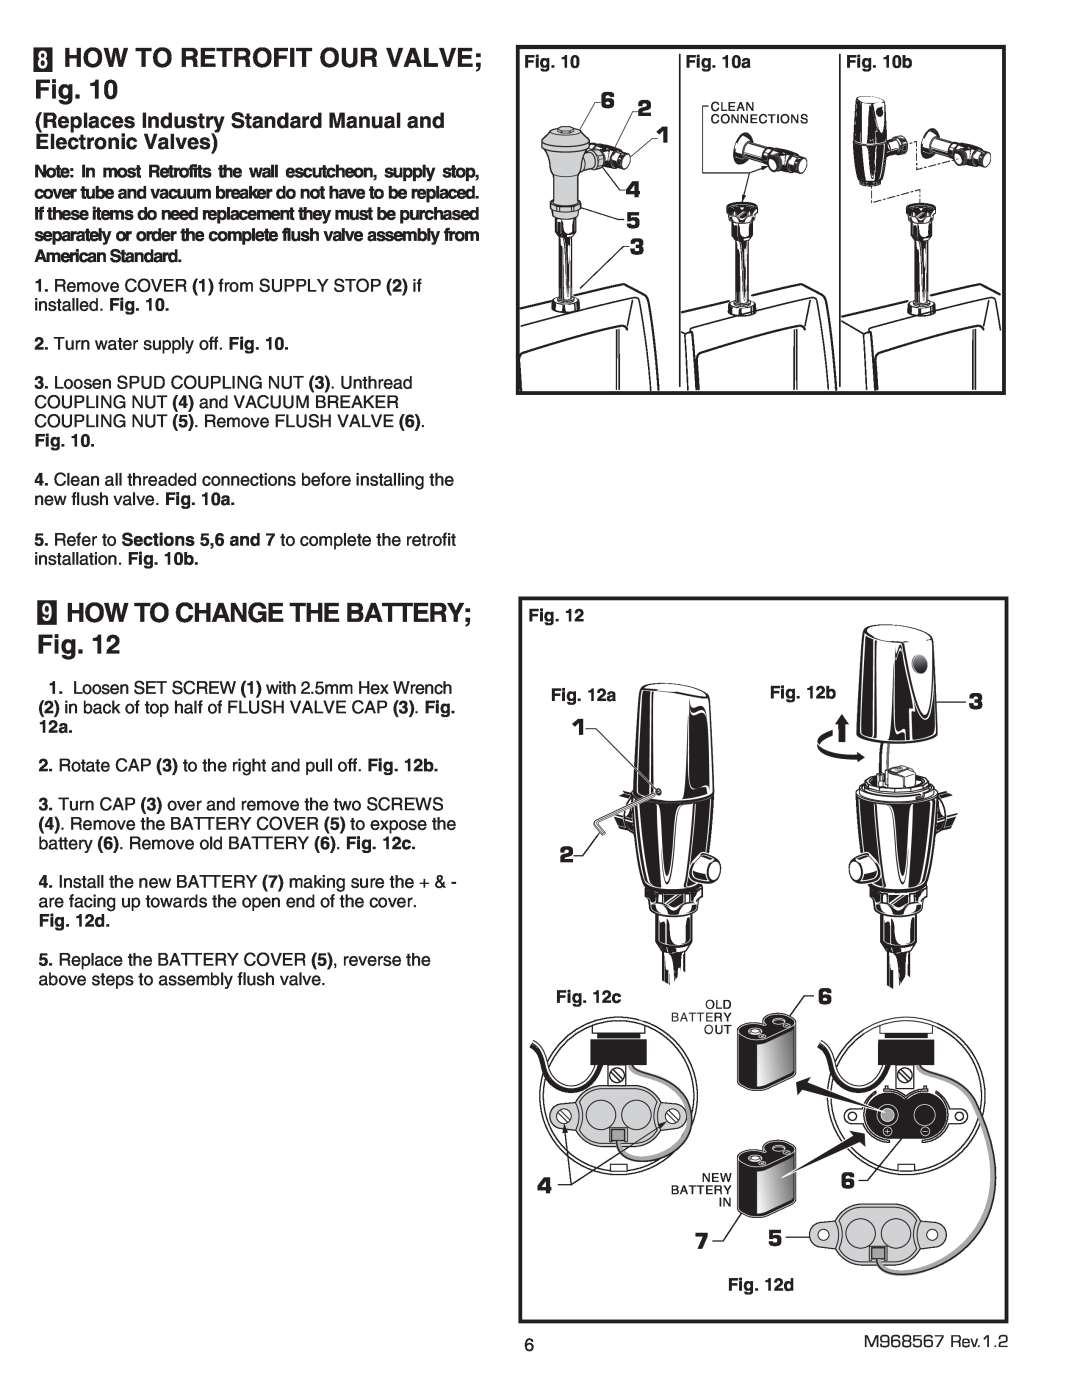 American Standard 6063.101, 6063.505, 6063.051 8HOW TO RETROFIT OUR VALVE Fig, 9HOW TO CHANGE THE BATTERY Fig, 1 4 5 